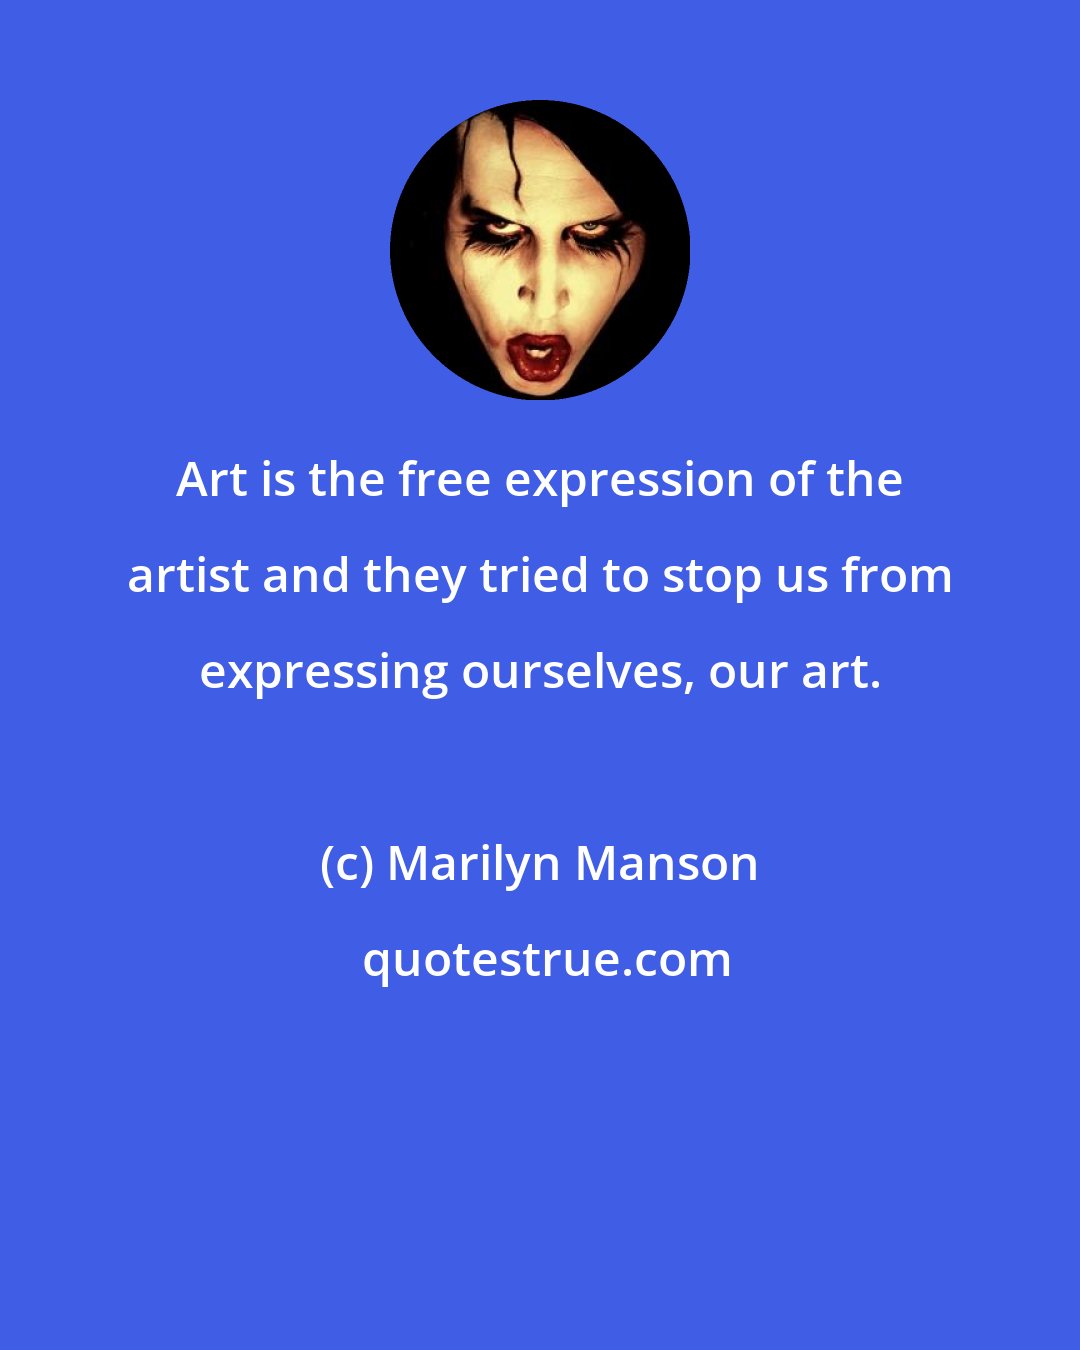 Marilyn Manson: Art is the free expression of the artist and they tried to stop us from expressing ourselves, our art.